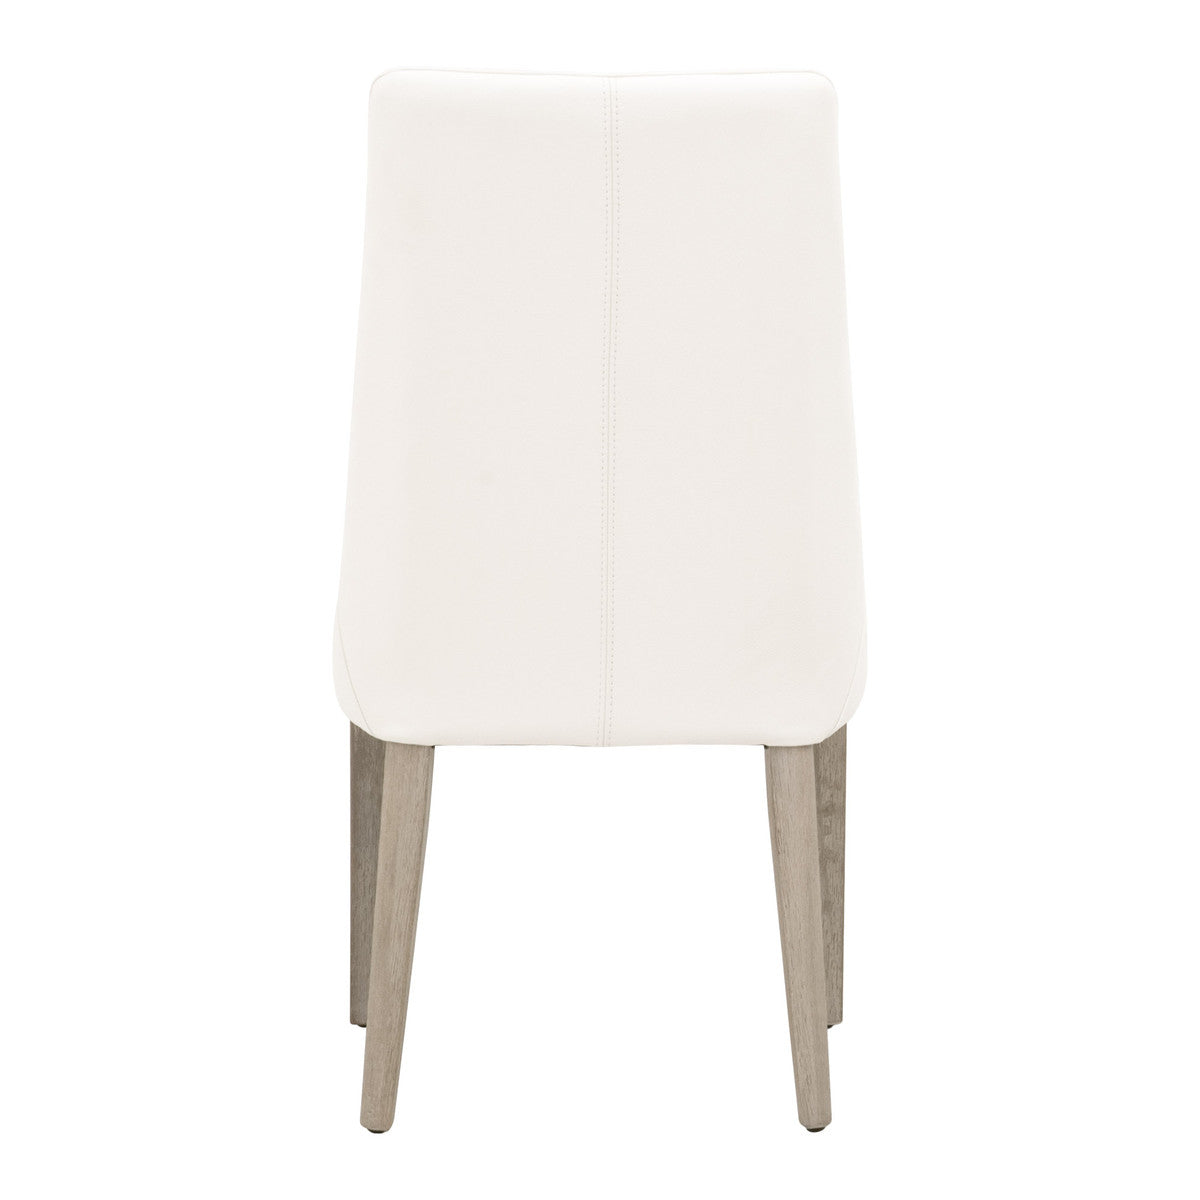 Aurora Dining Chair in Alabaster Top Grain Leather, Natural Gray, Set of 2 - 5131.ALA/NG